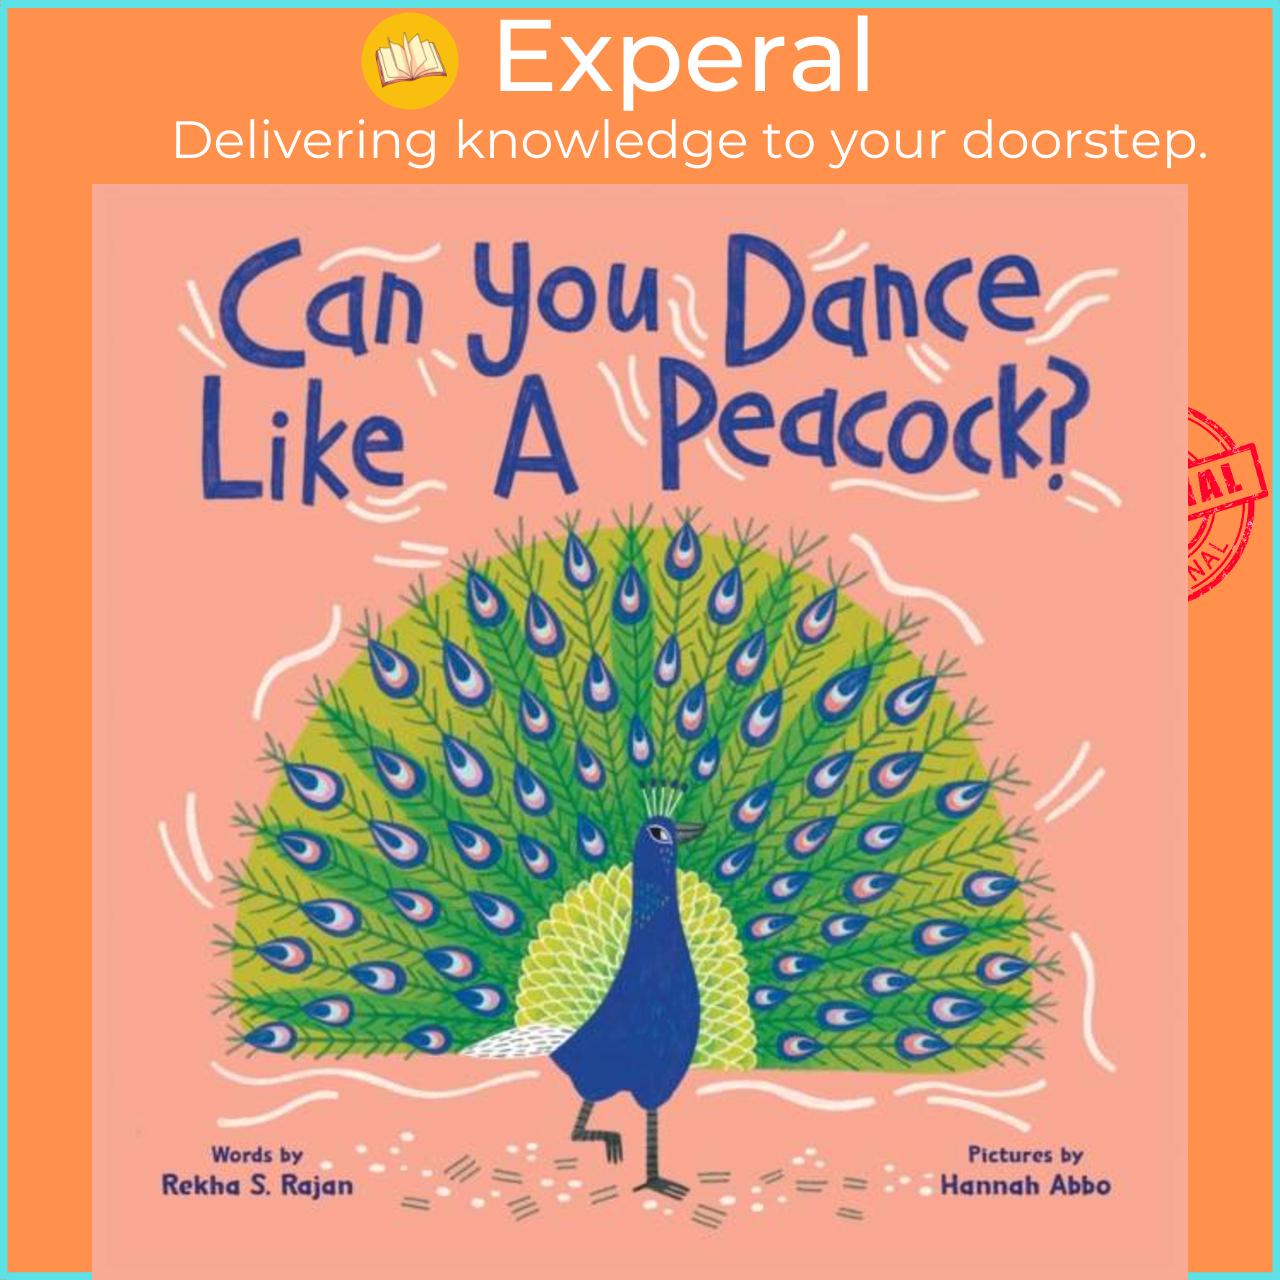 Sách - Can You Dance Like a Peacock? by Hannah Abbo (UK edition, hardcover)